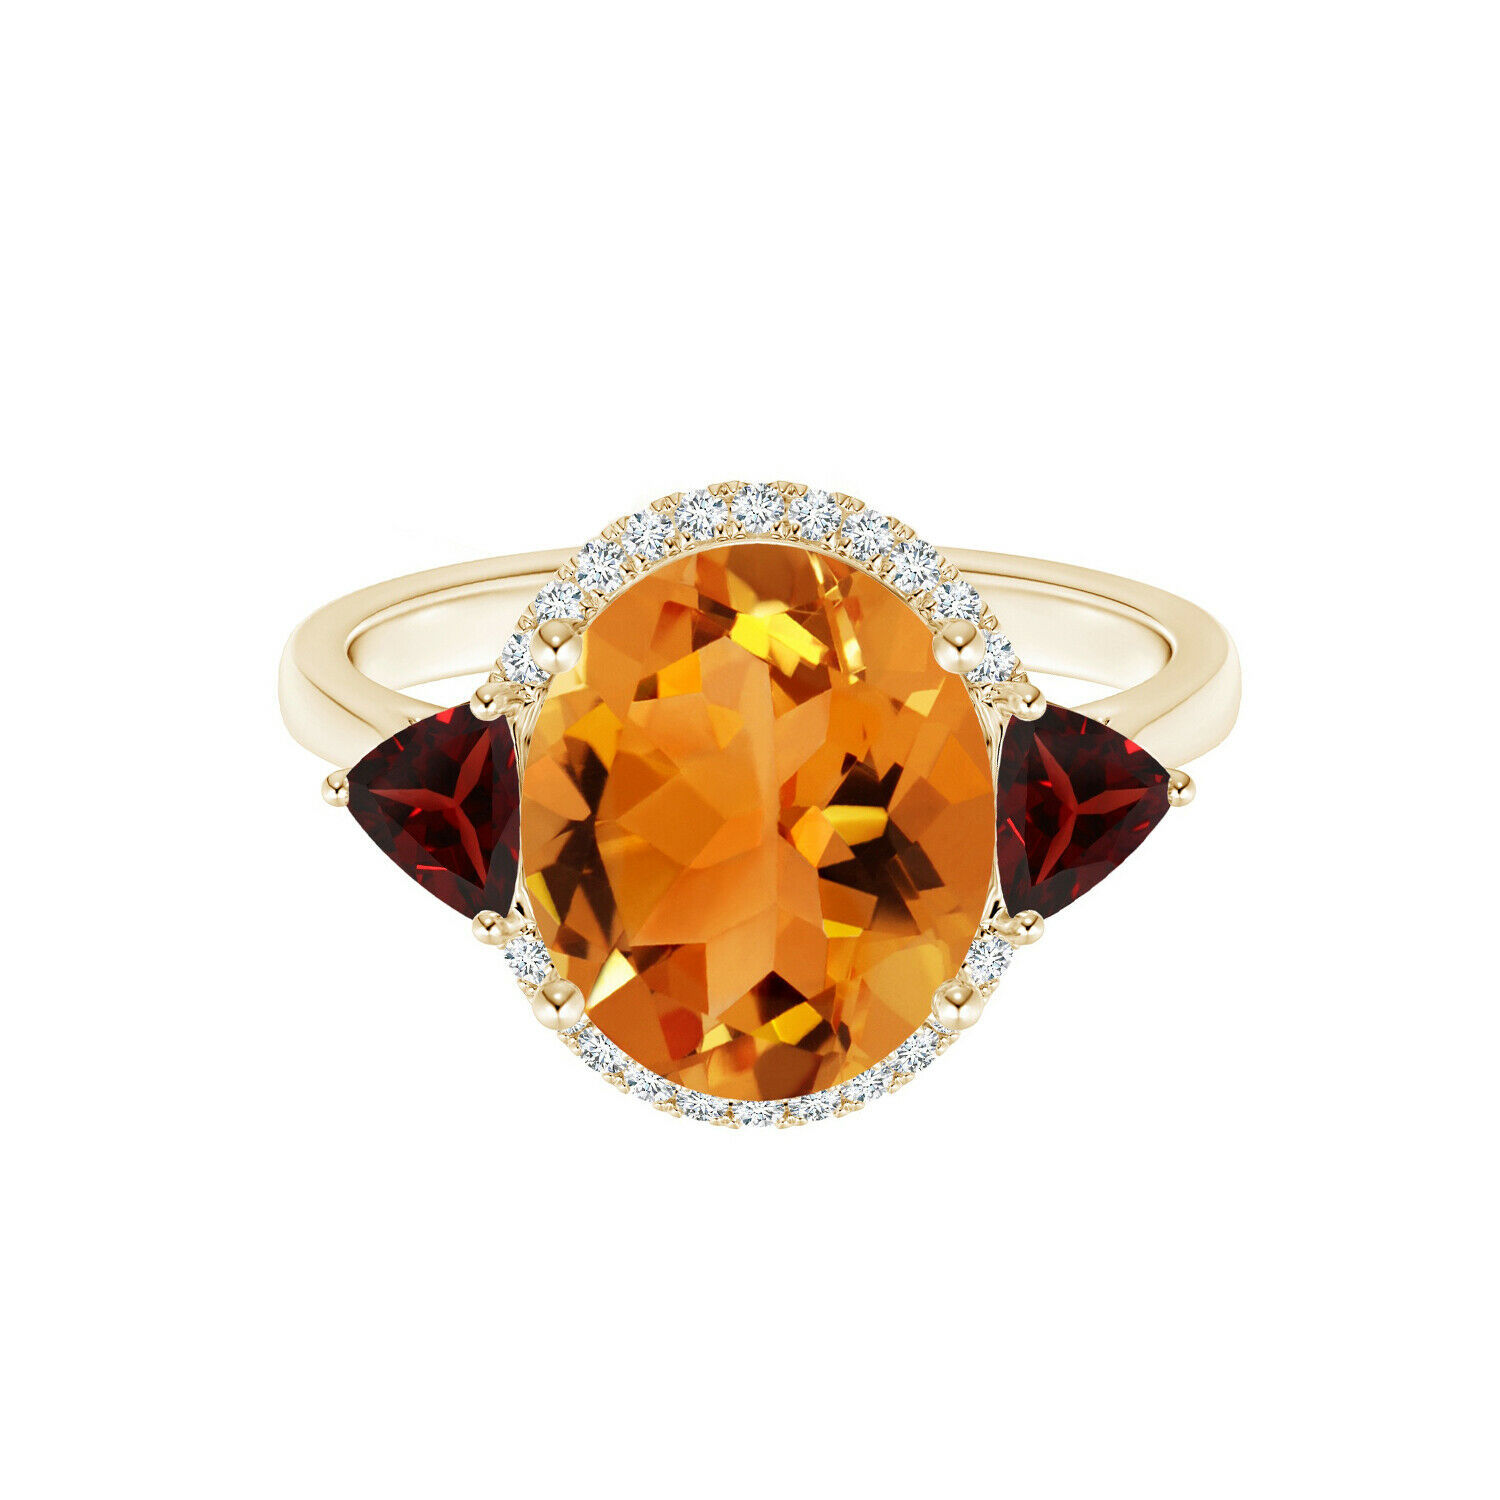 1.50 Cts Genuine Oval Citrine & Trillion Garnet Cocktail Ring 9K Yellow Gold